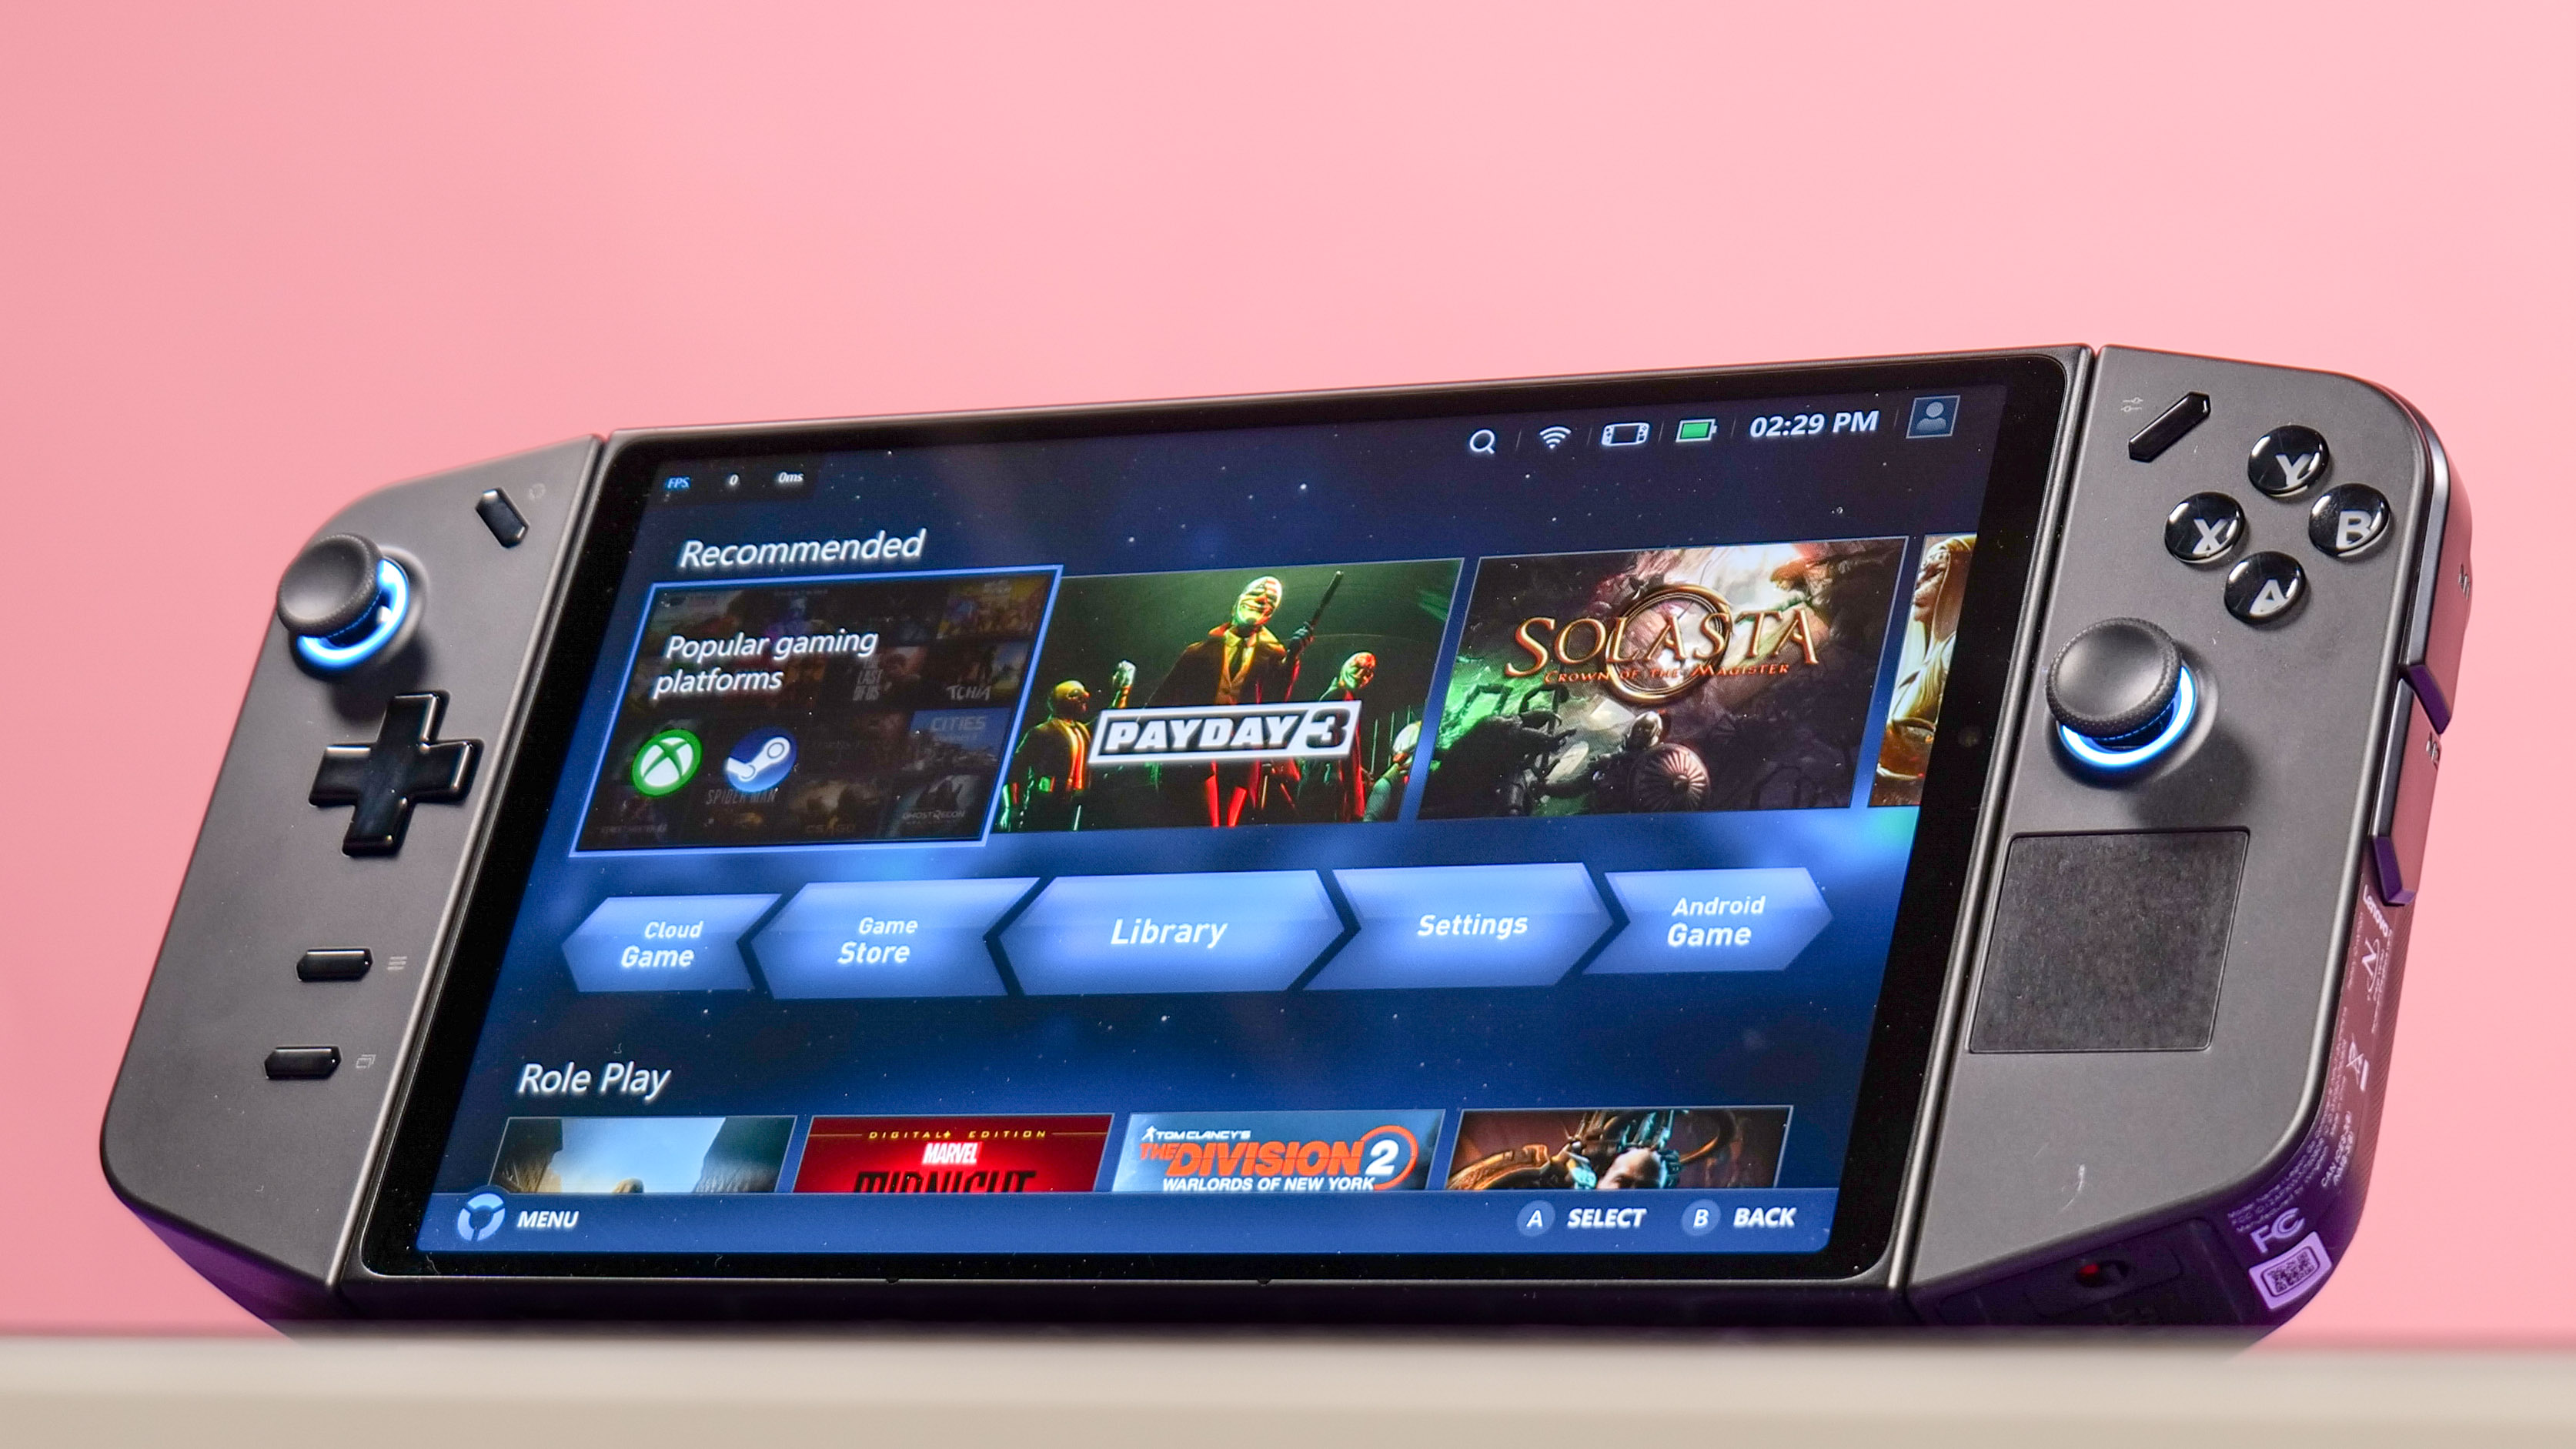 With Legion Go gaming handheld, Lenovo takes aim at the ROG Ally